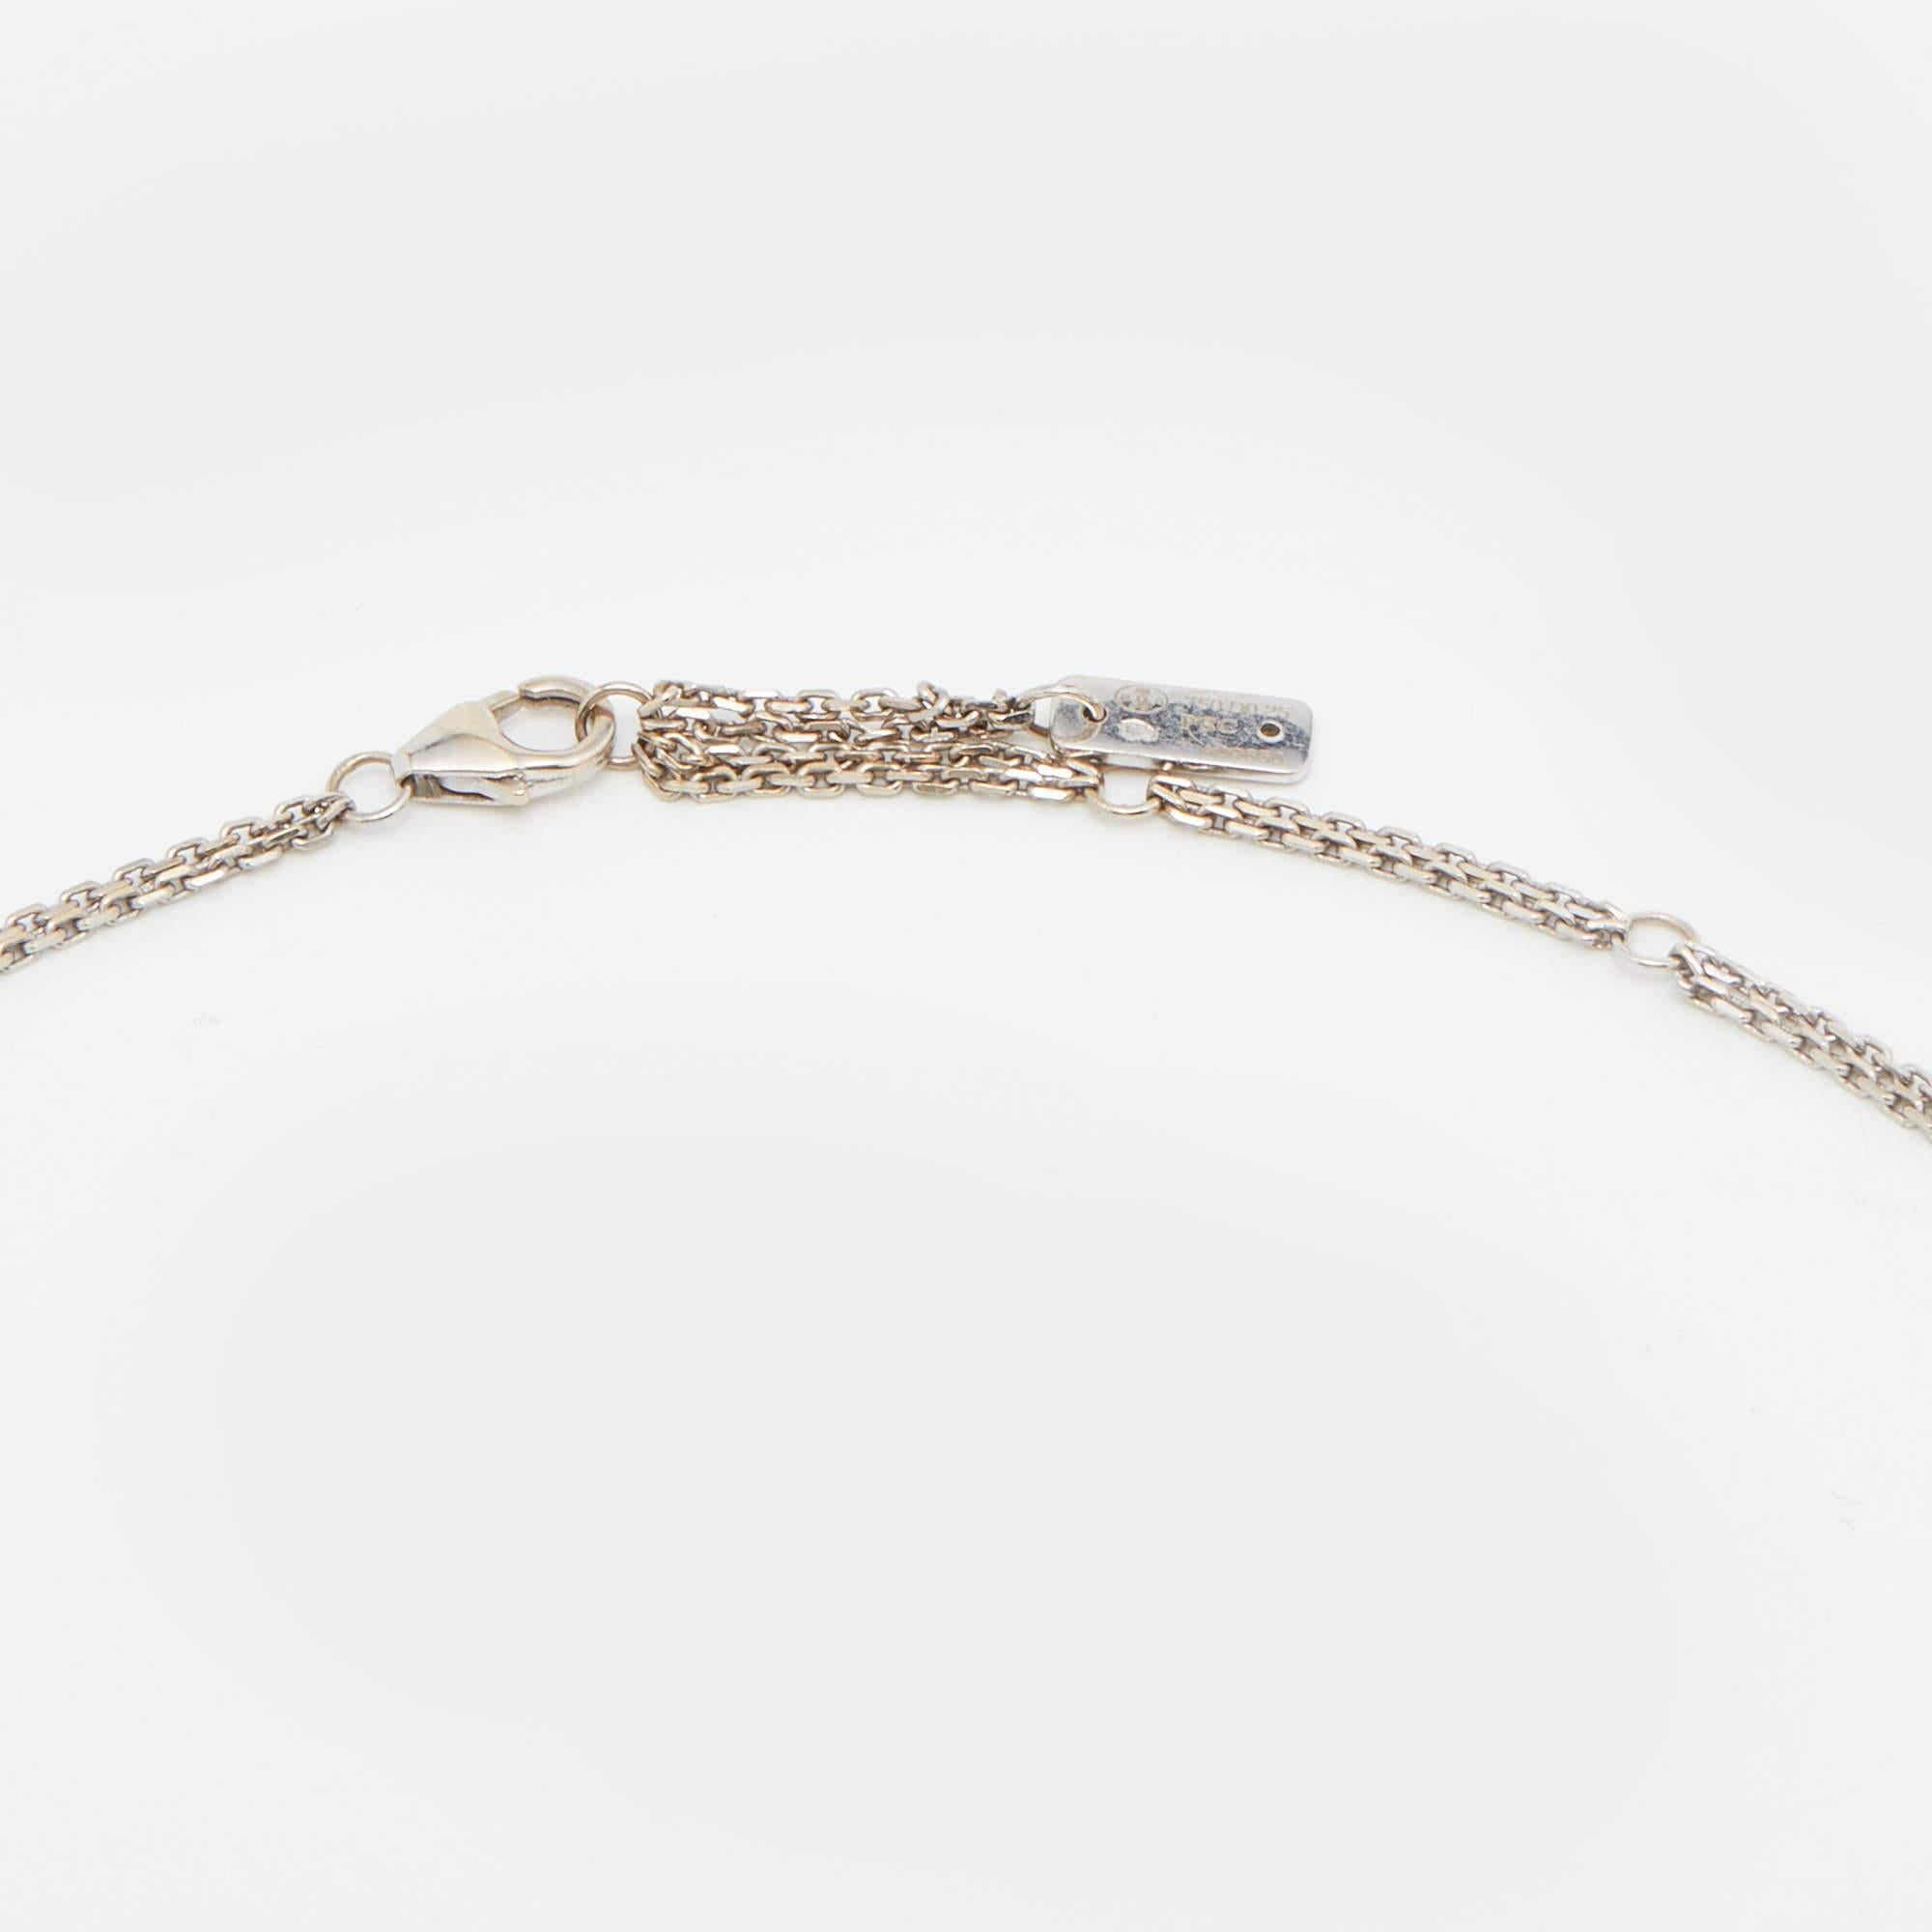 The Move collection has designs that are both wearable and timeless. This wondrous thing of beauty is handmade from 18k white gold, and the double chains hold a feminine, rectangular cage pendant. Within the cage, three diamonds are trapped, and